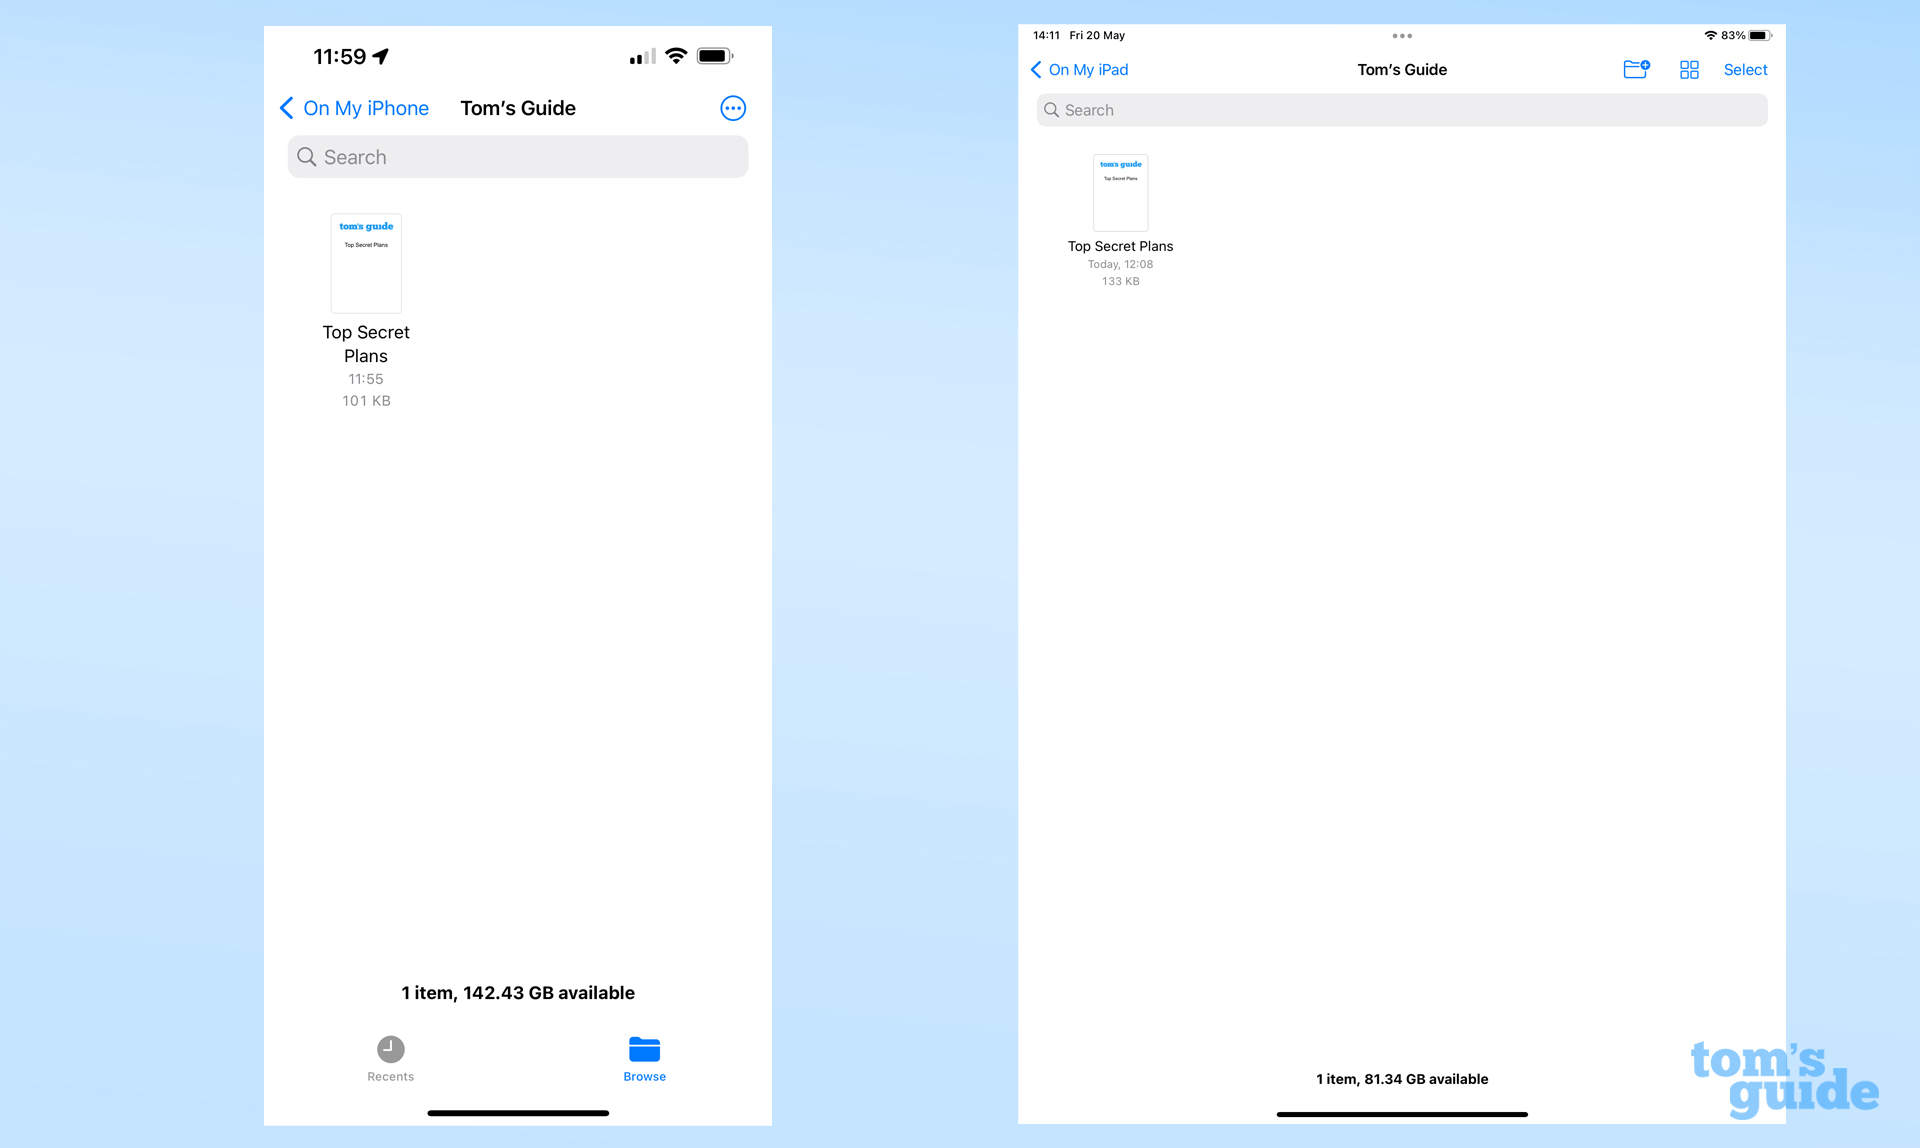 A screenshot from an iPhone and an iPad side-by-side, showing the iOS Files app